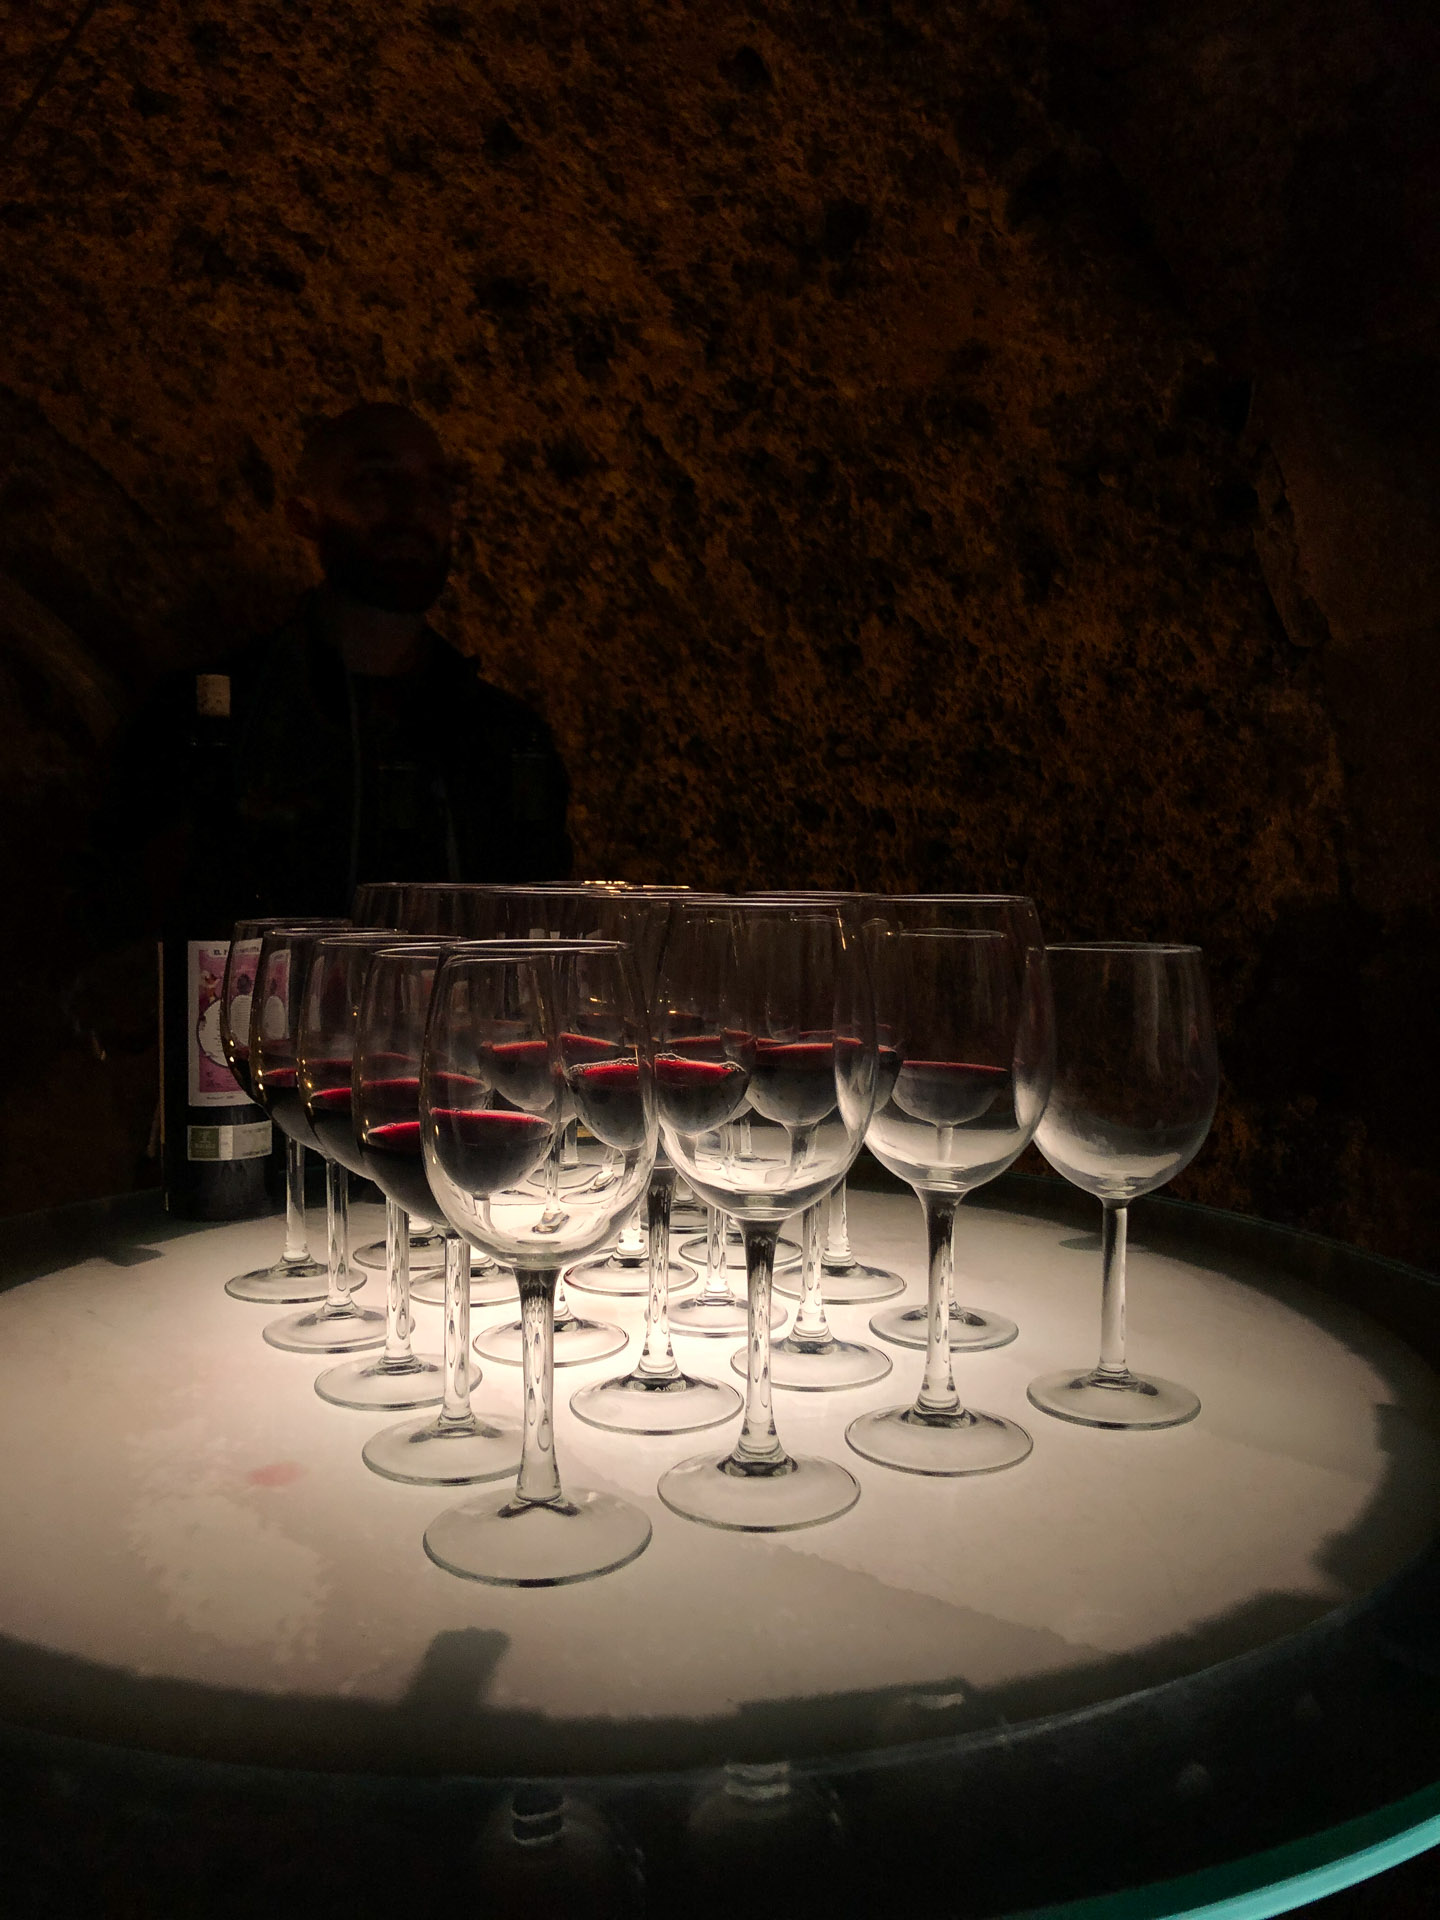 wine glasses lit up from below while standing on a wine barrel